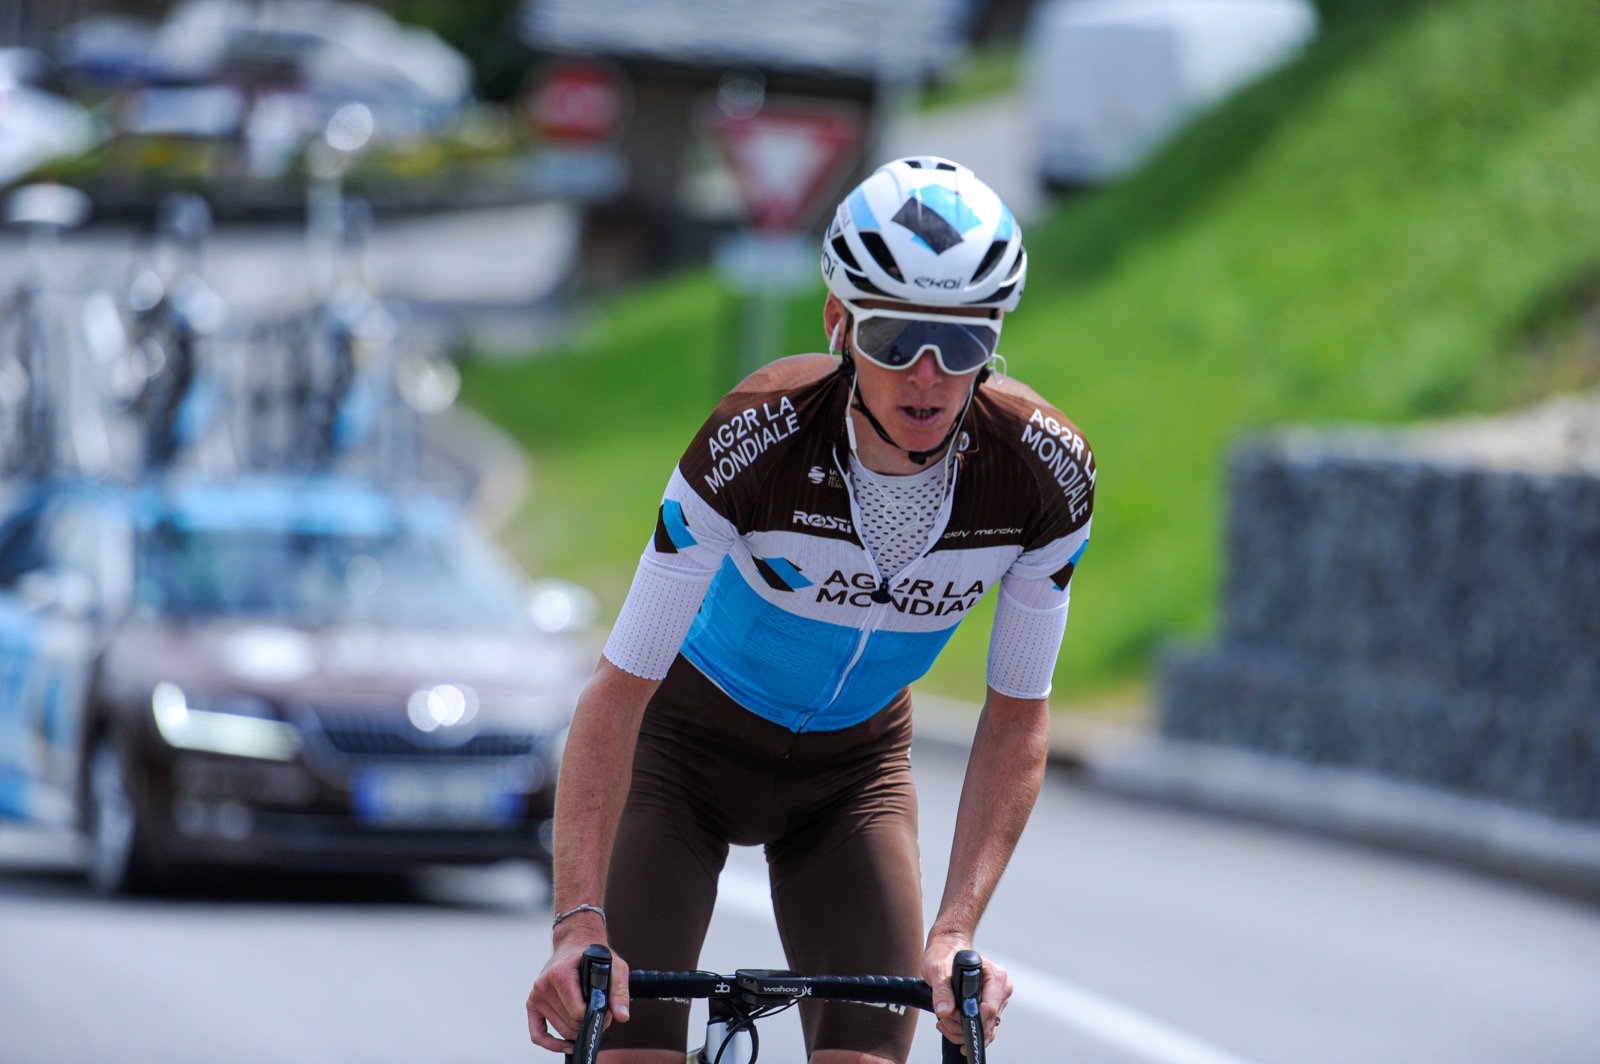 BOLLÉ SUPPORTS AG2R LA MONDIALE AT UPCOMING TOUR DE FRANCE WITH ITS LATEST CHRONOSHIELD SUNGLASSES